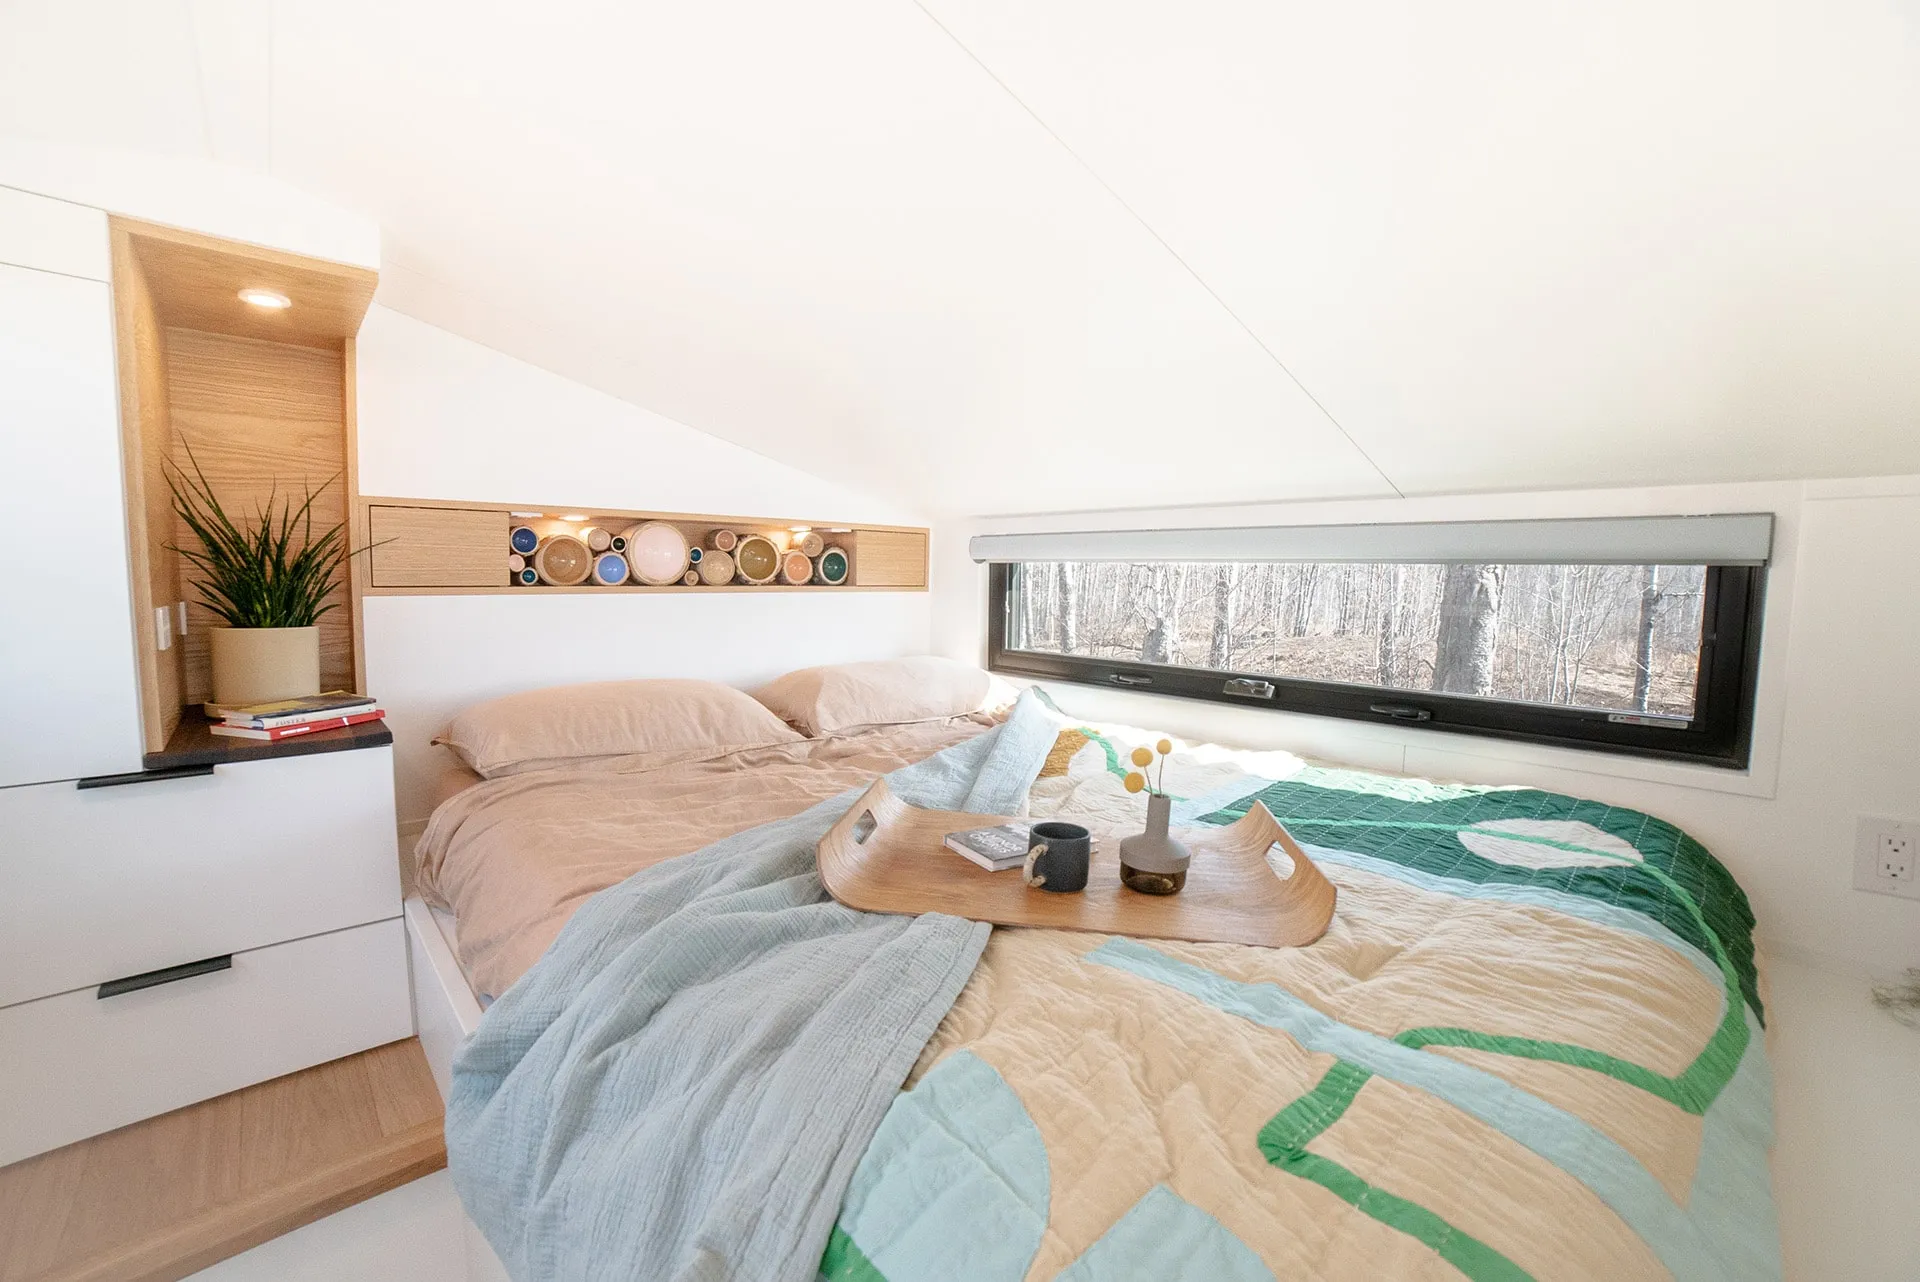 aqua tiny homes small and cozy interior bedroom with queen size bed 